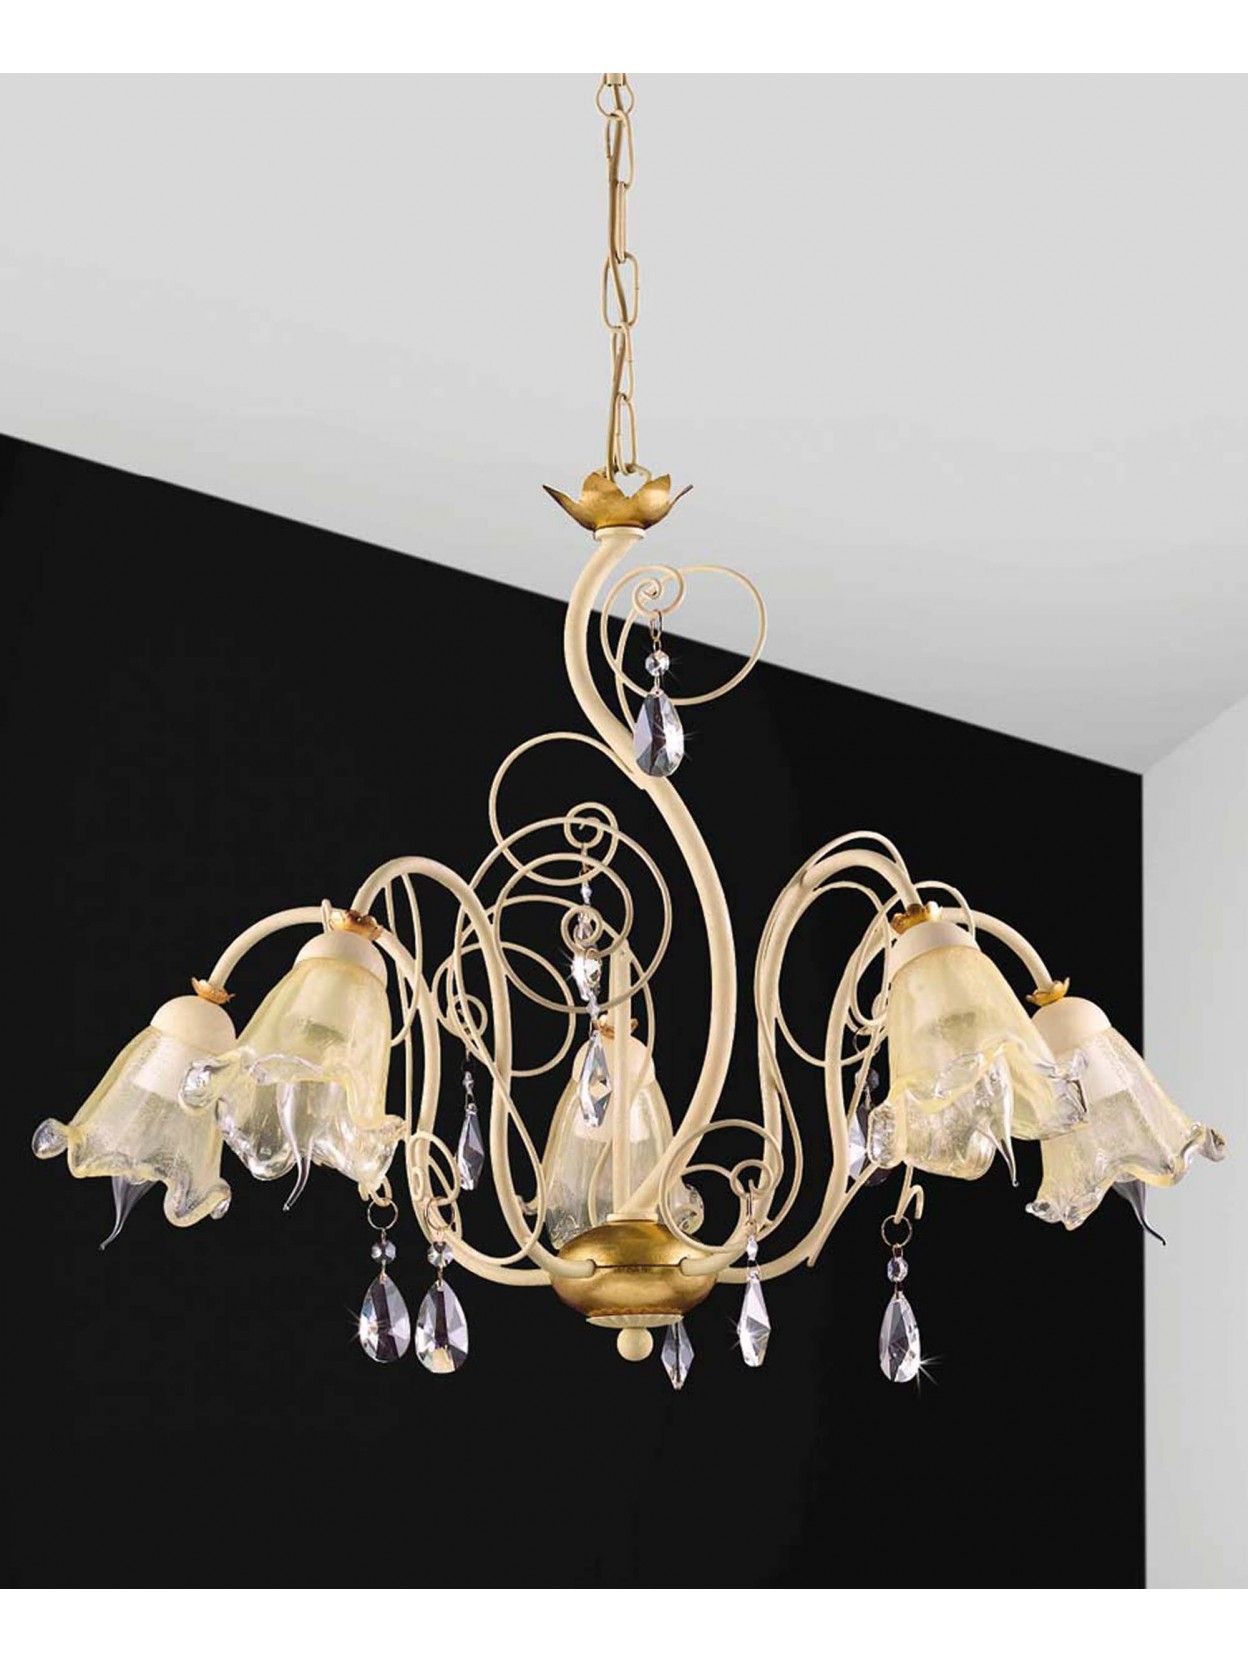 Chandelier 5 Lights Wrought Iron Cream And Gold Leaf Pre 156/5 Inside Cream And Rusty Lantern Chandeliers (View 6 of 15)